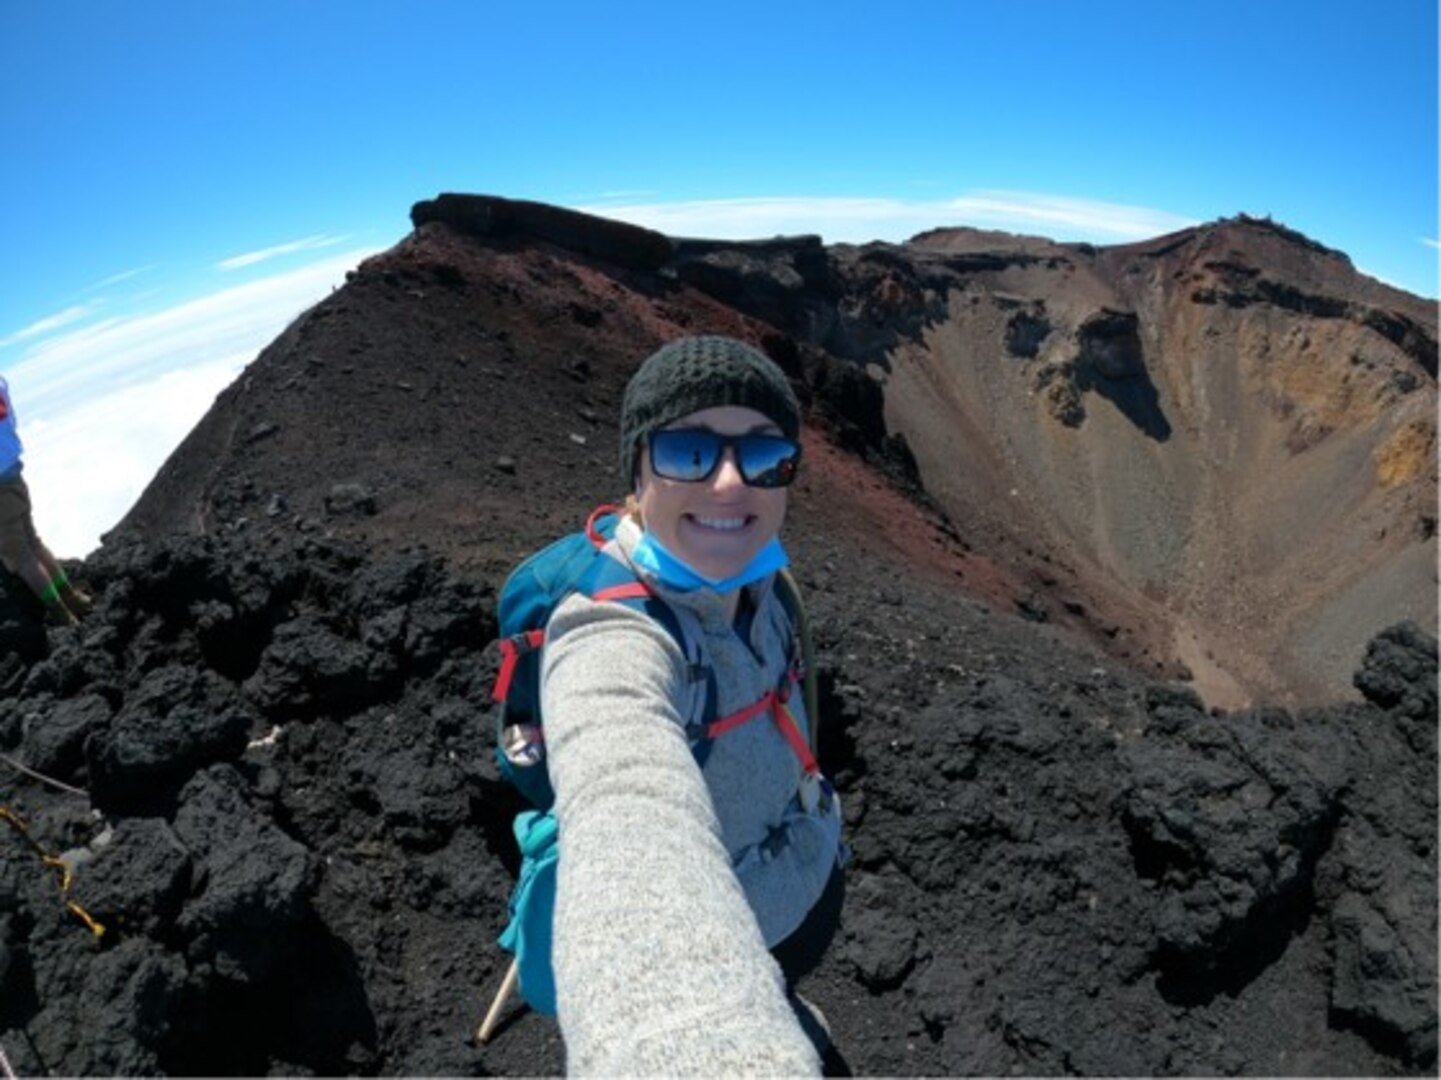 U.S. Navy Lt. Claire Burke reaches the summit of Mount Fuji in Honshu, Japan, the tallest mountain in the country, and one of the highest peaks in the world with an elevation of 3,776 feet.